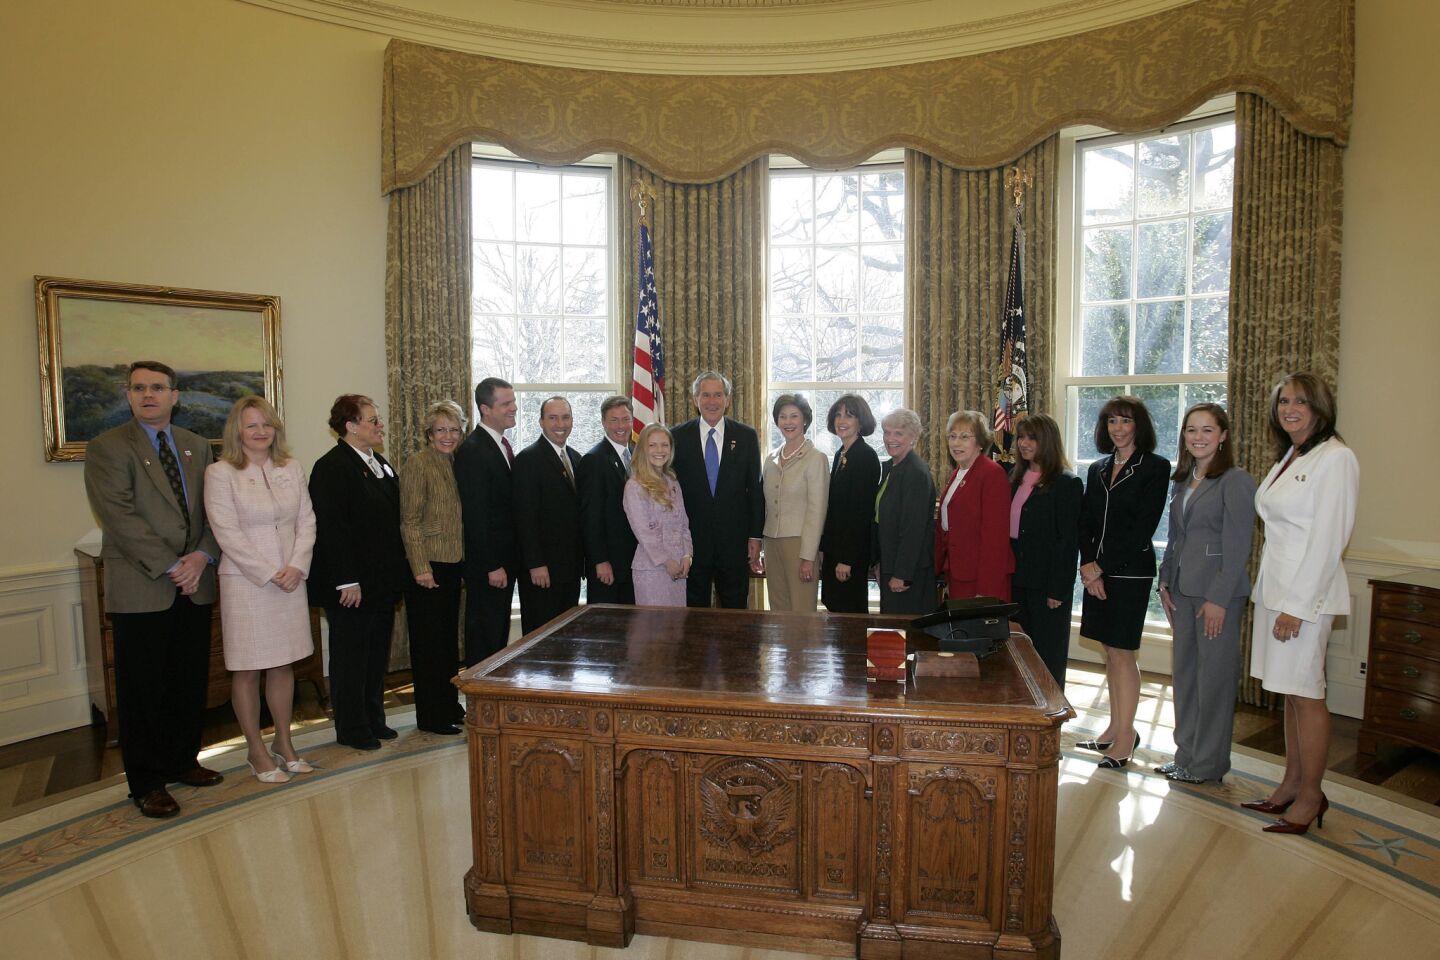 In the Oval Office